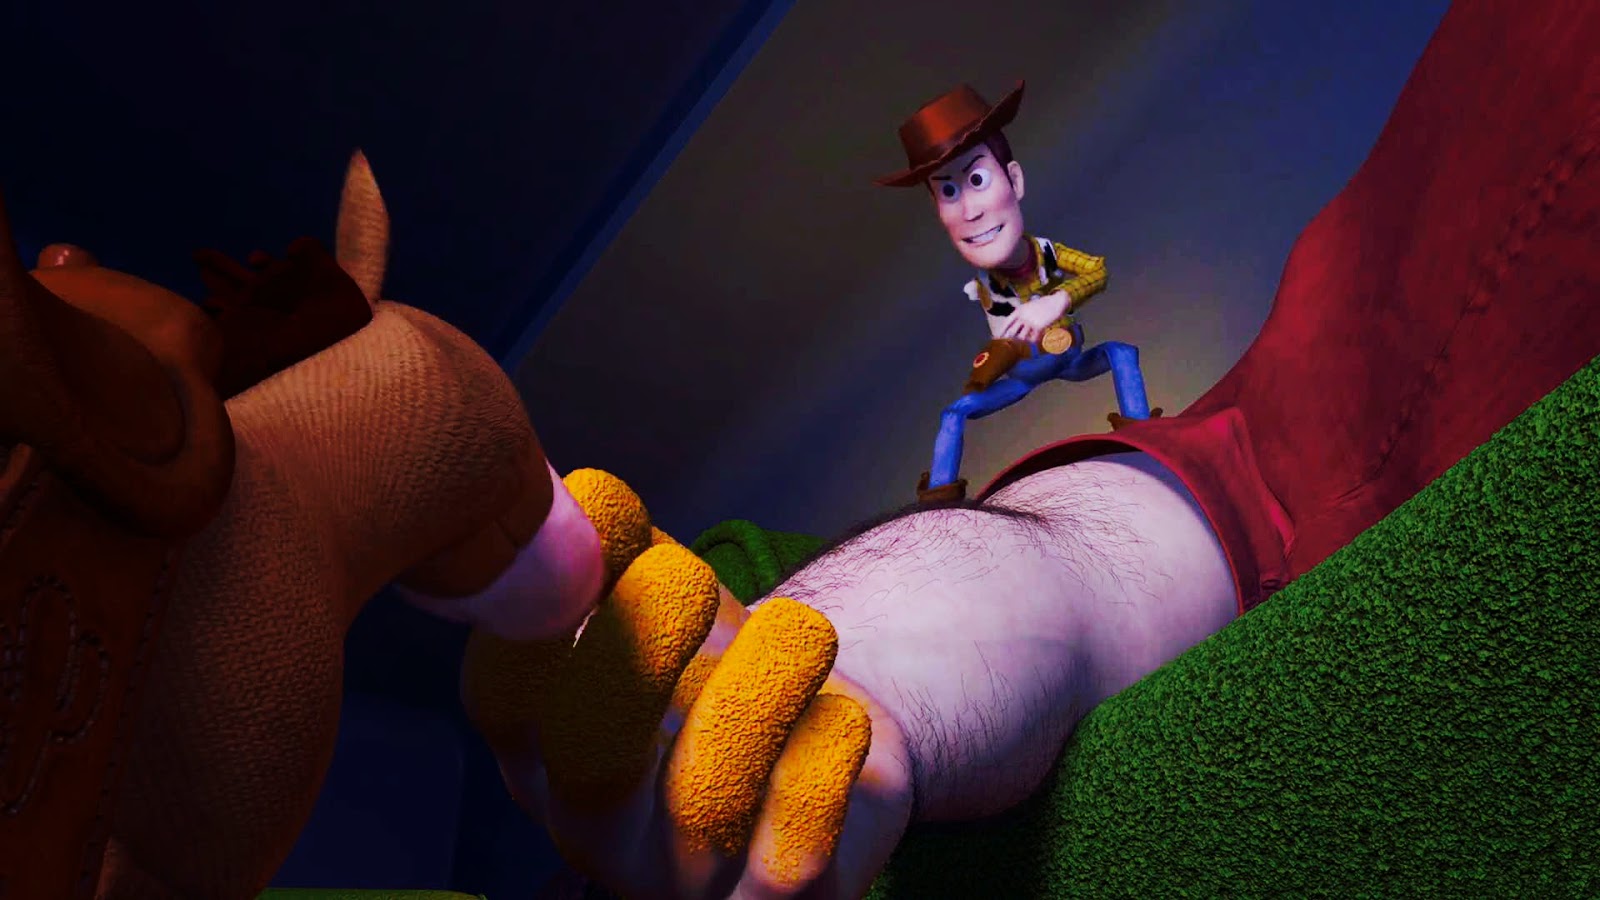 Toy story dick shadow